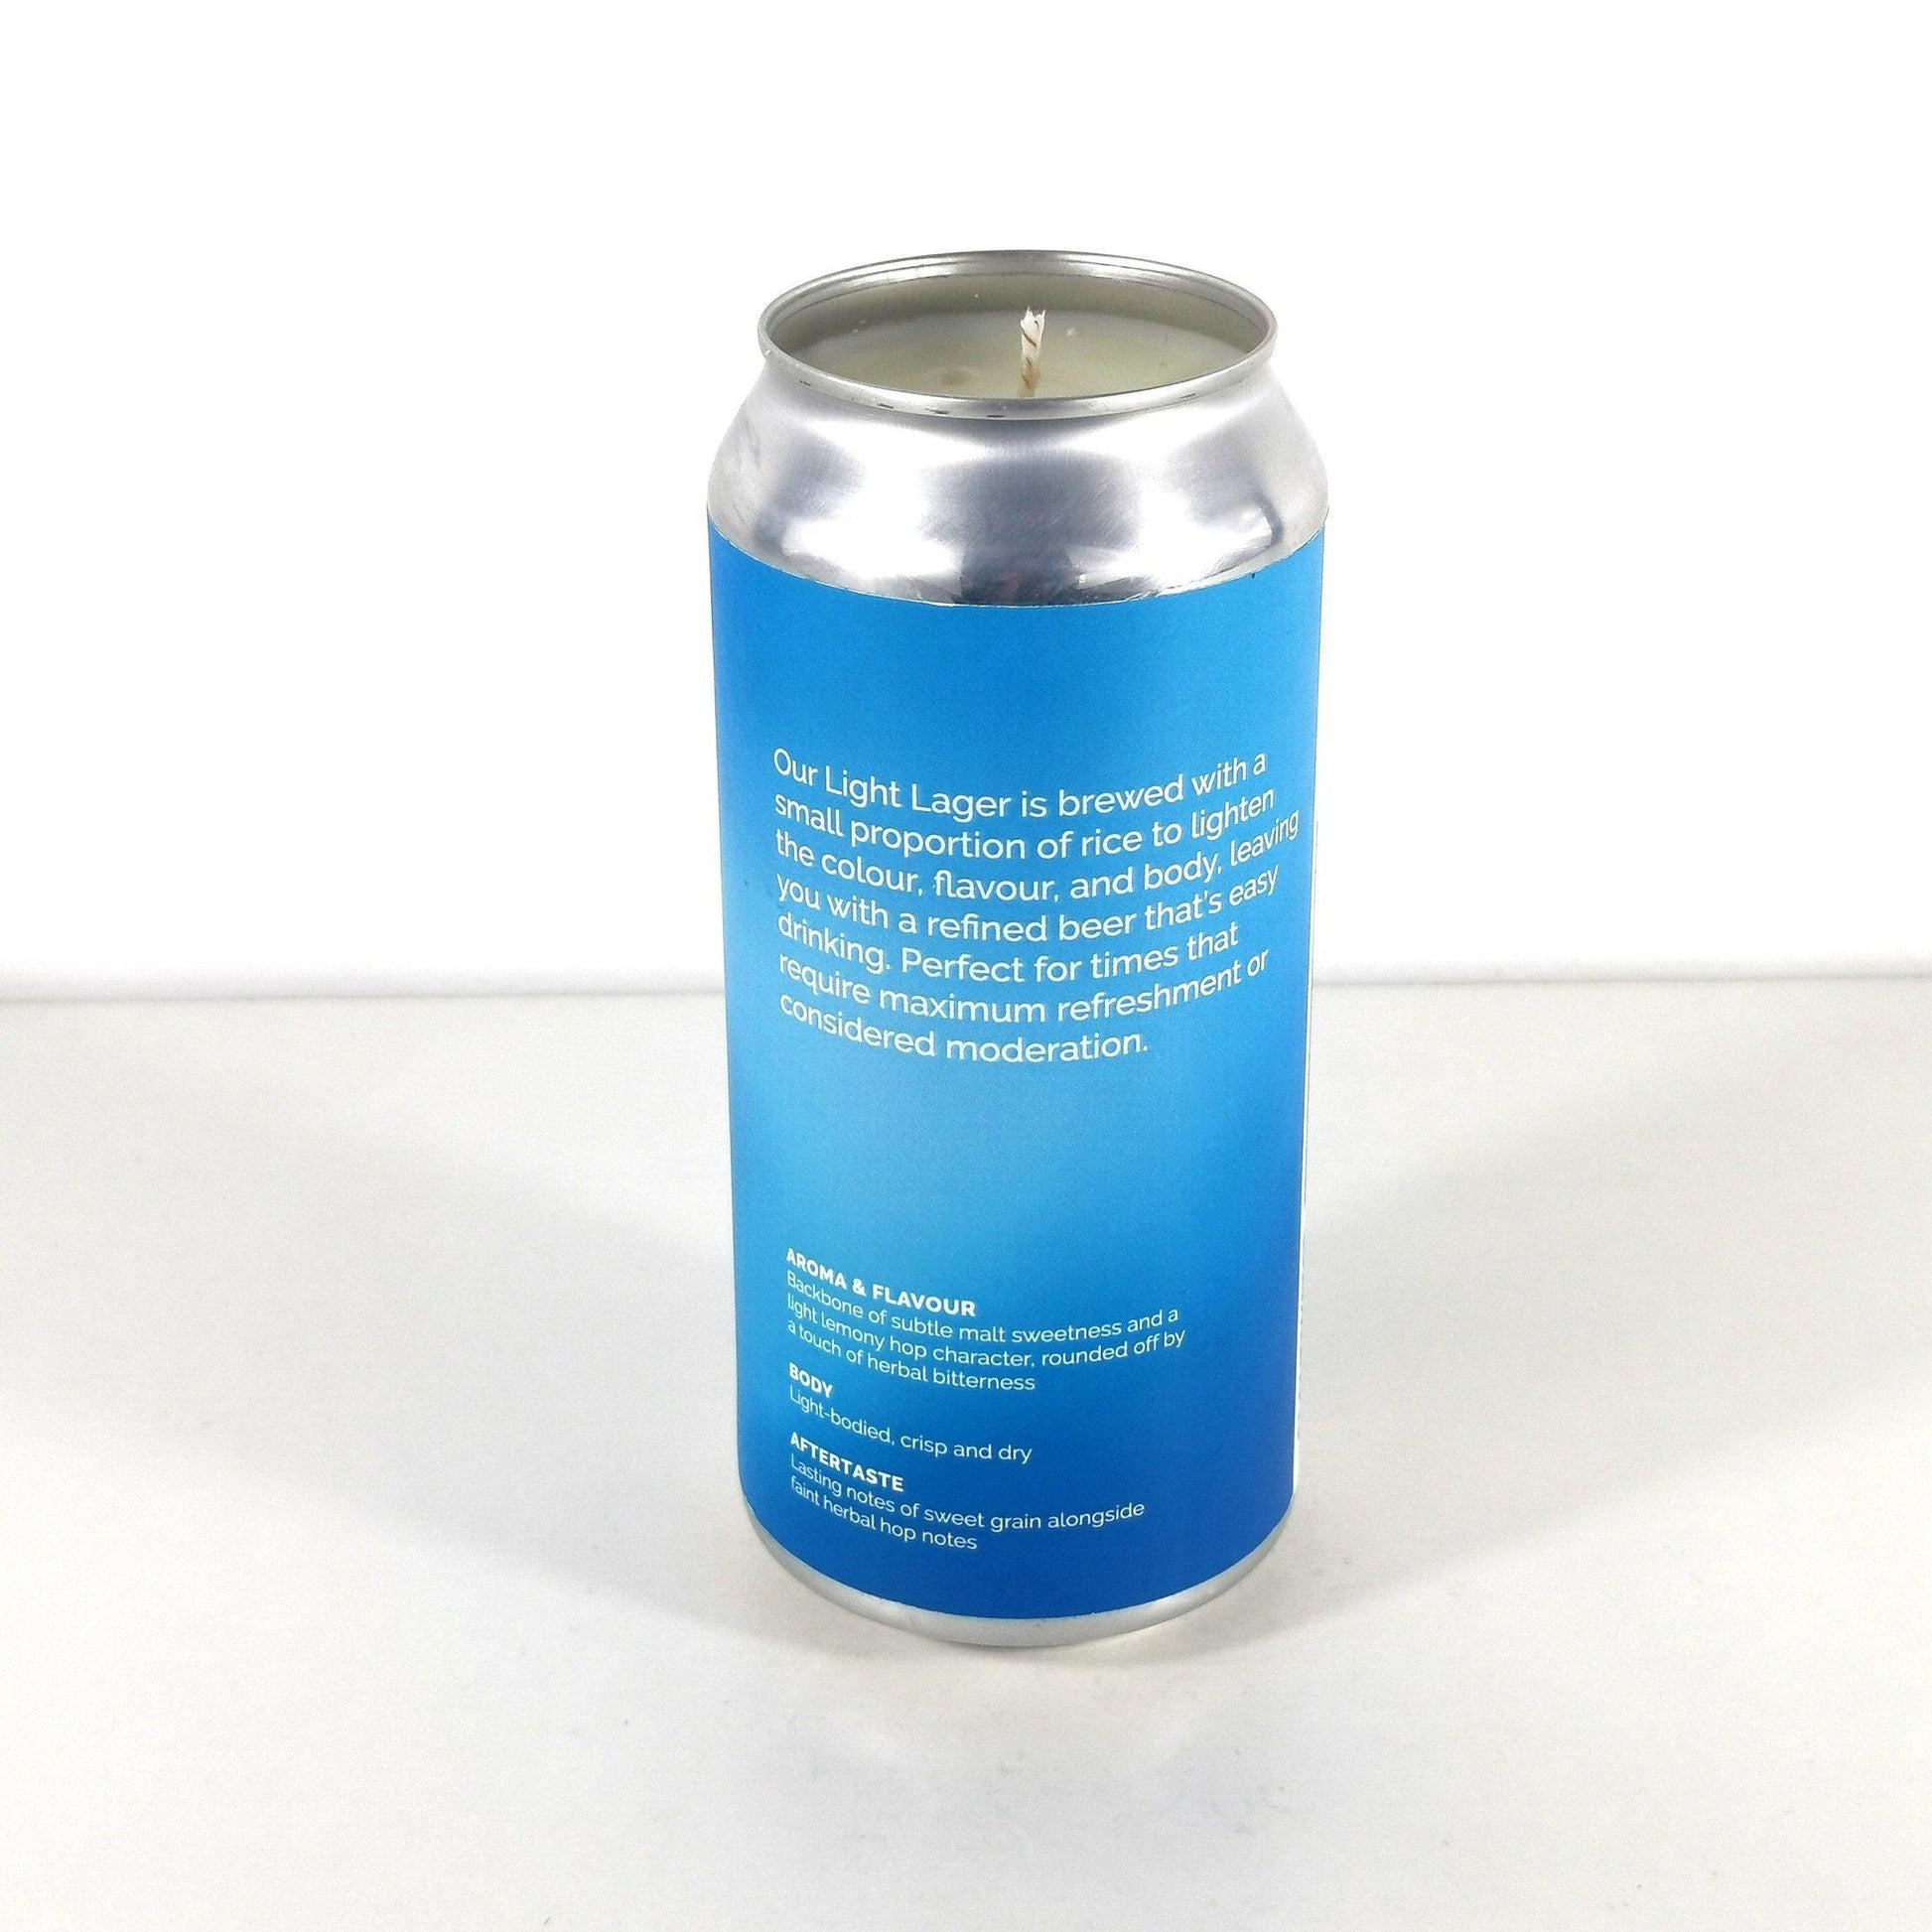 Cloudwater Light Lager Craft Beer Can Candle Beer Can Candles Adhock Homeware